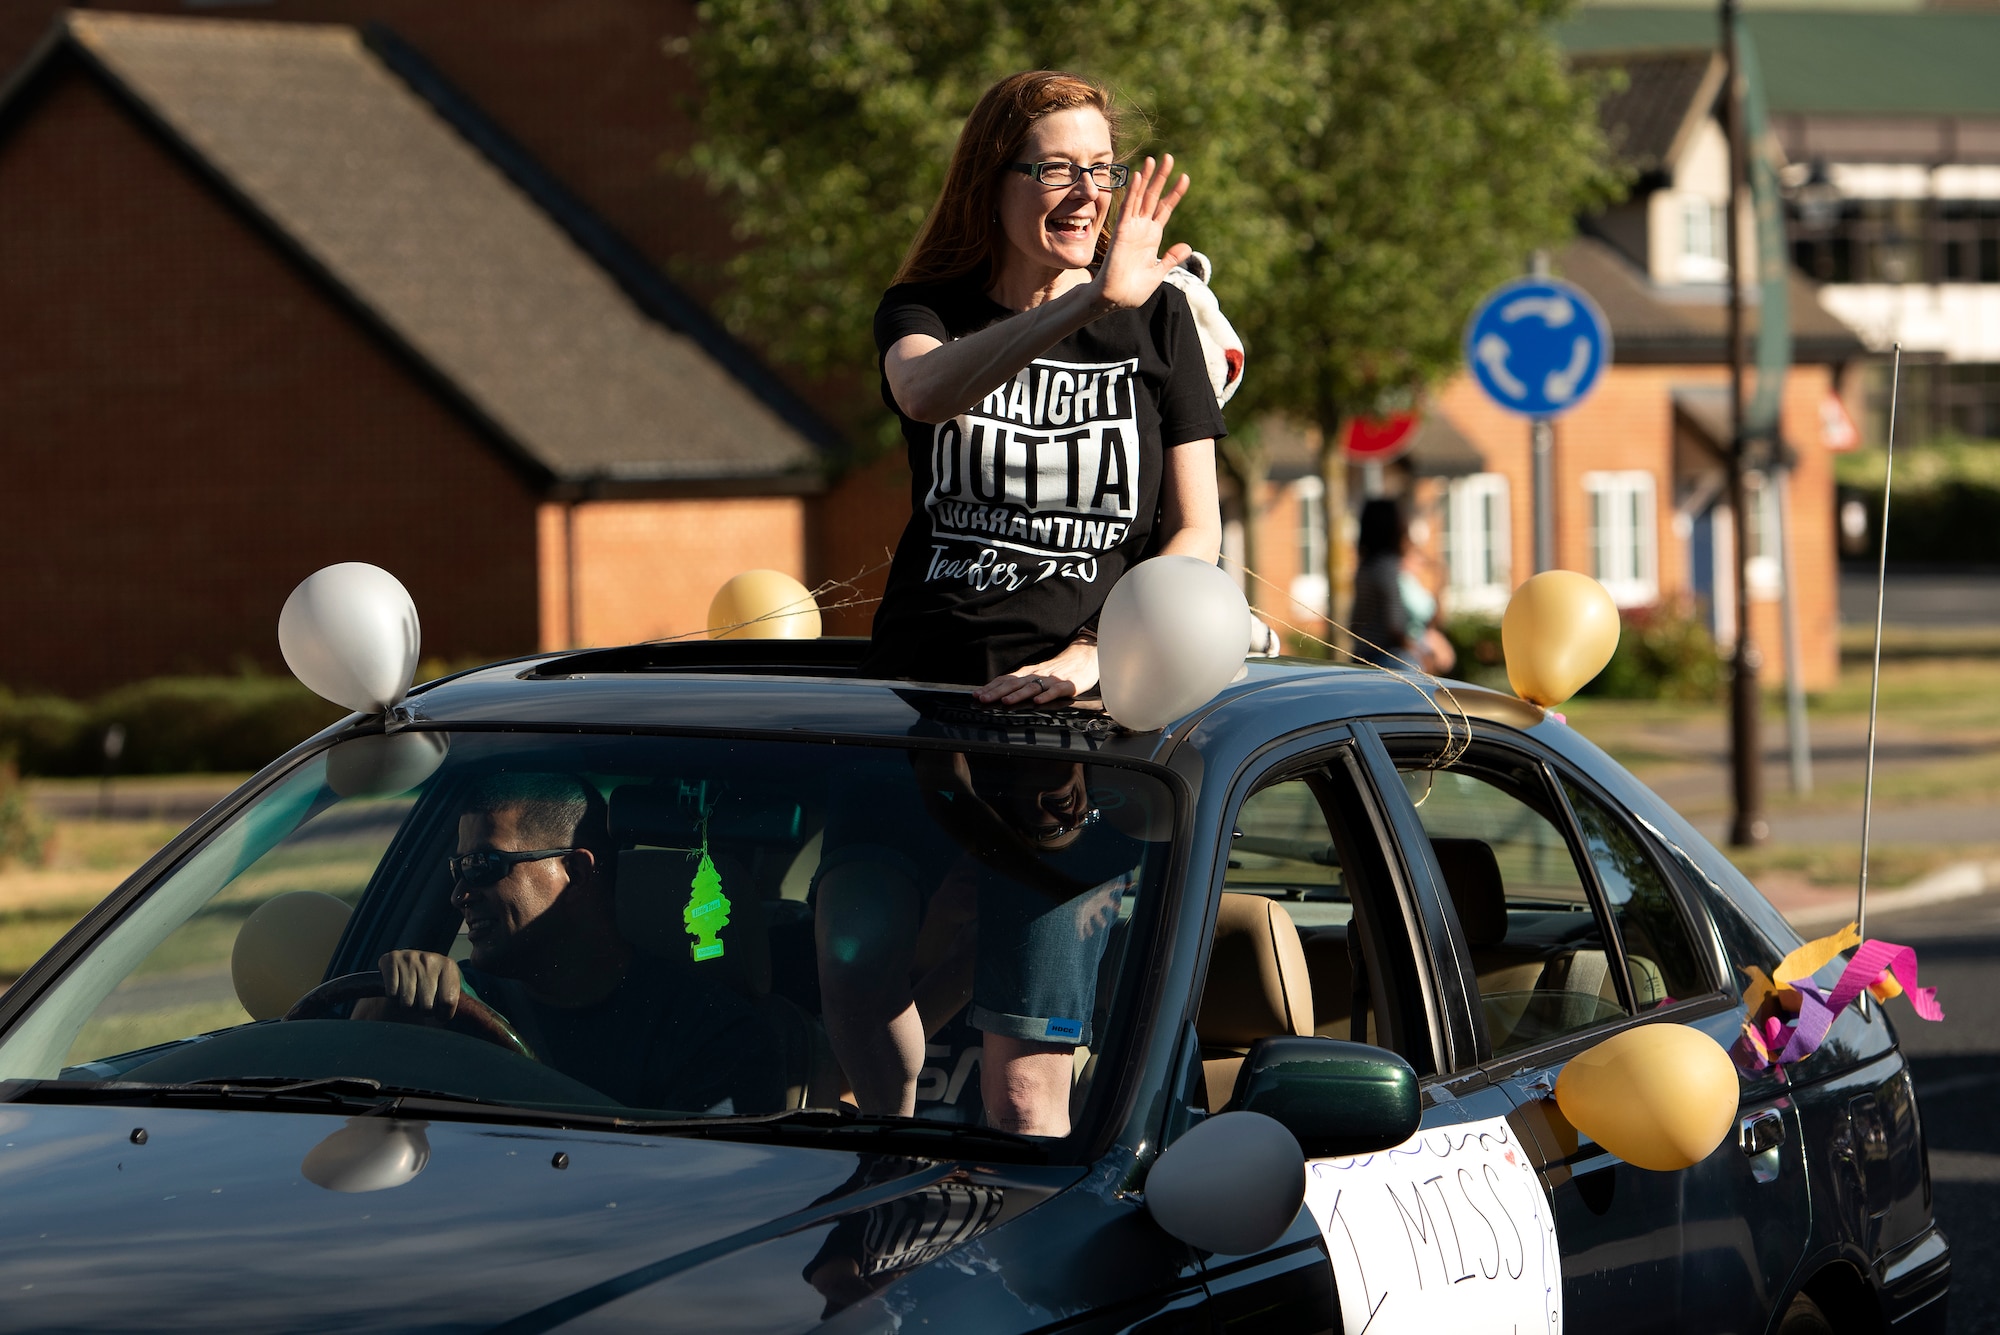 A Liberty Intermediate School teacher waves to students during a parade in Liberty Village at Royal Air Force Lakenheath, England, May 26, 2020. The parade was held as an end of school year "summer sendoff" for students, faculty, staff and family members. (U.S. Air Force photo by Airman 1st Class Jessi Monte)